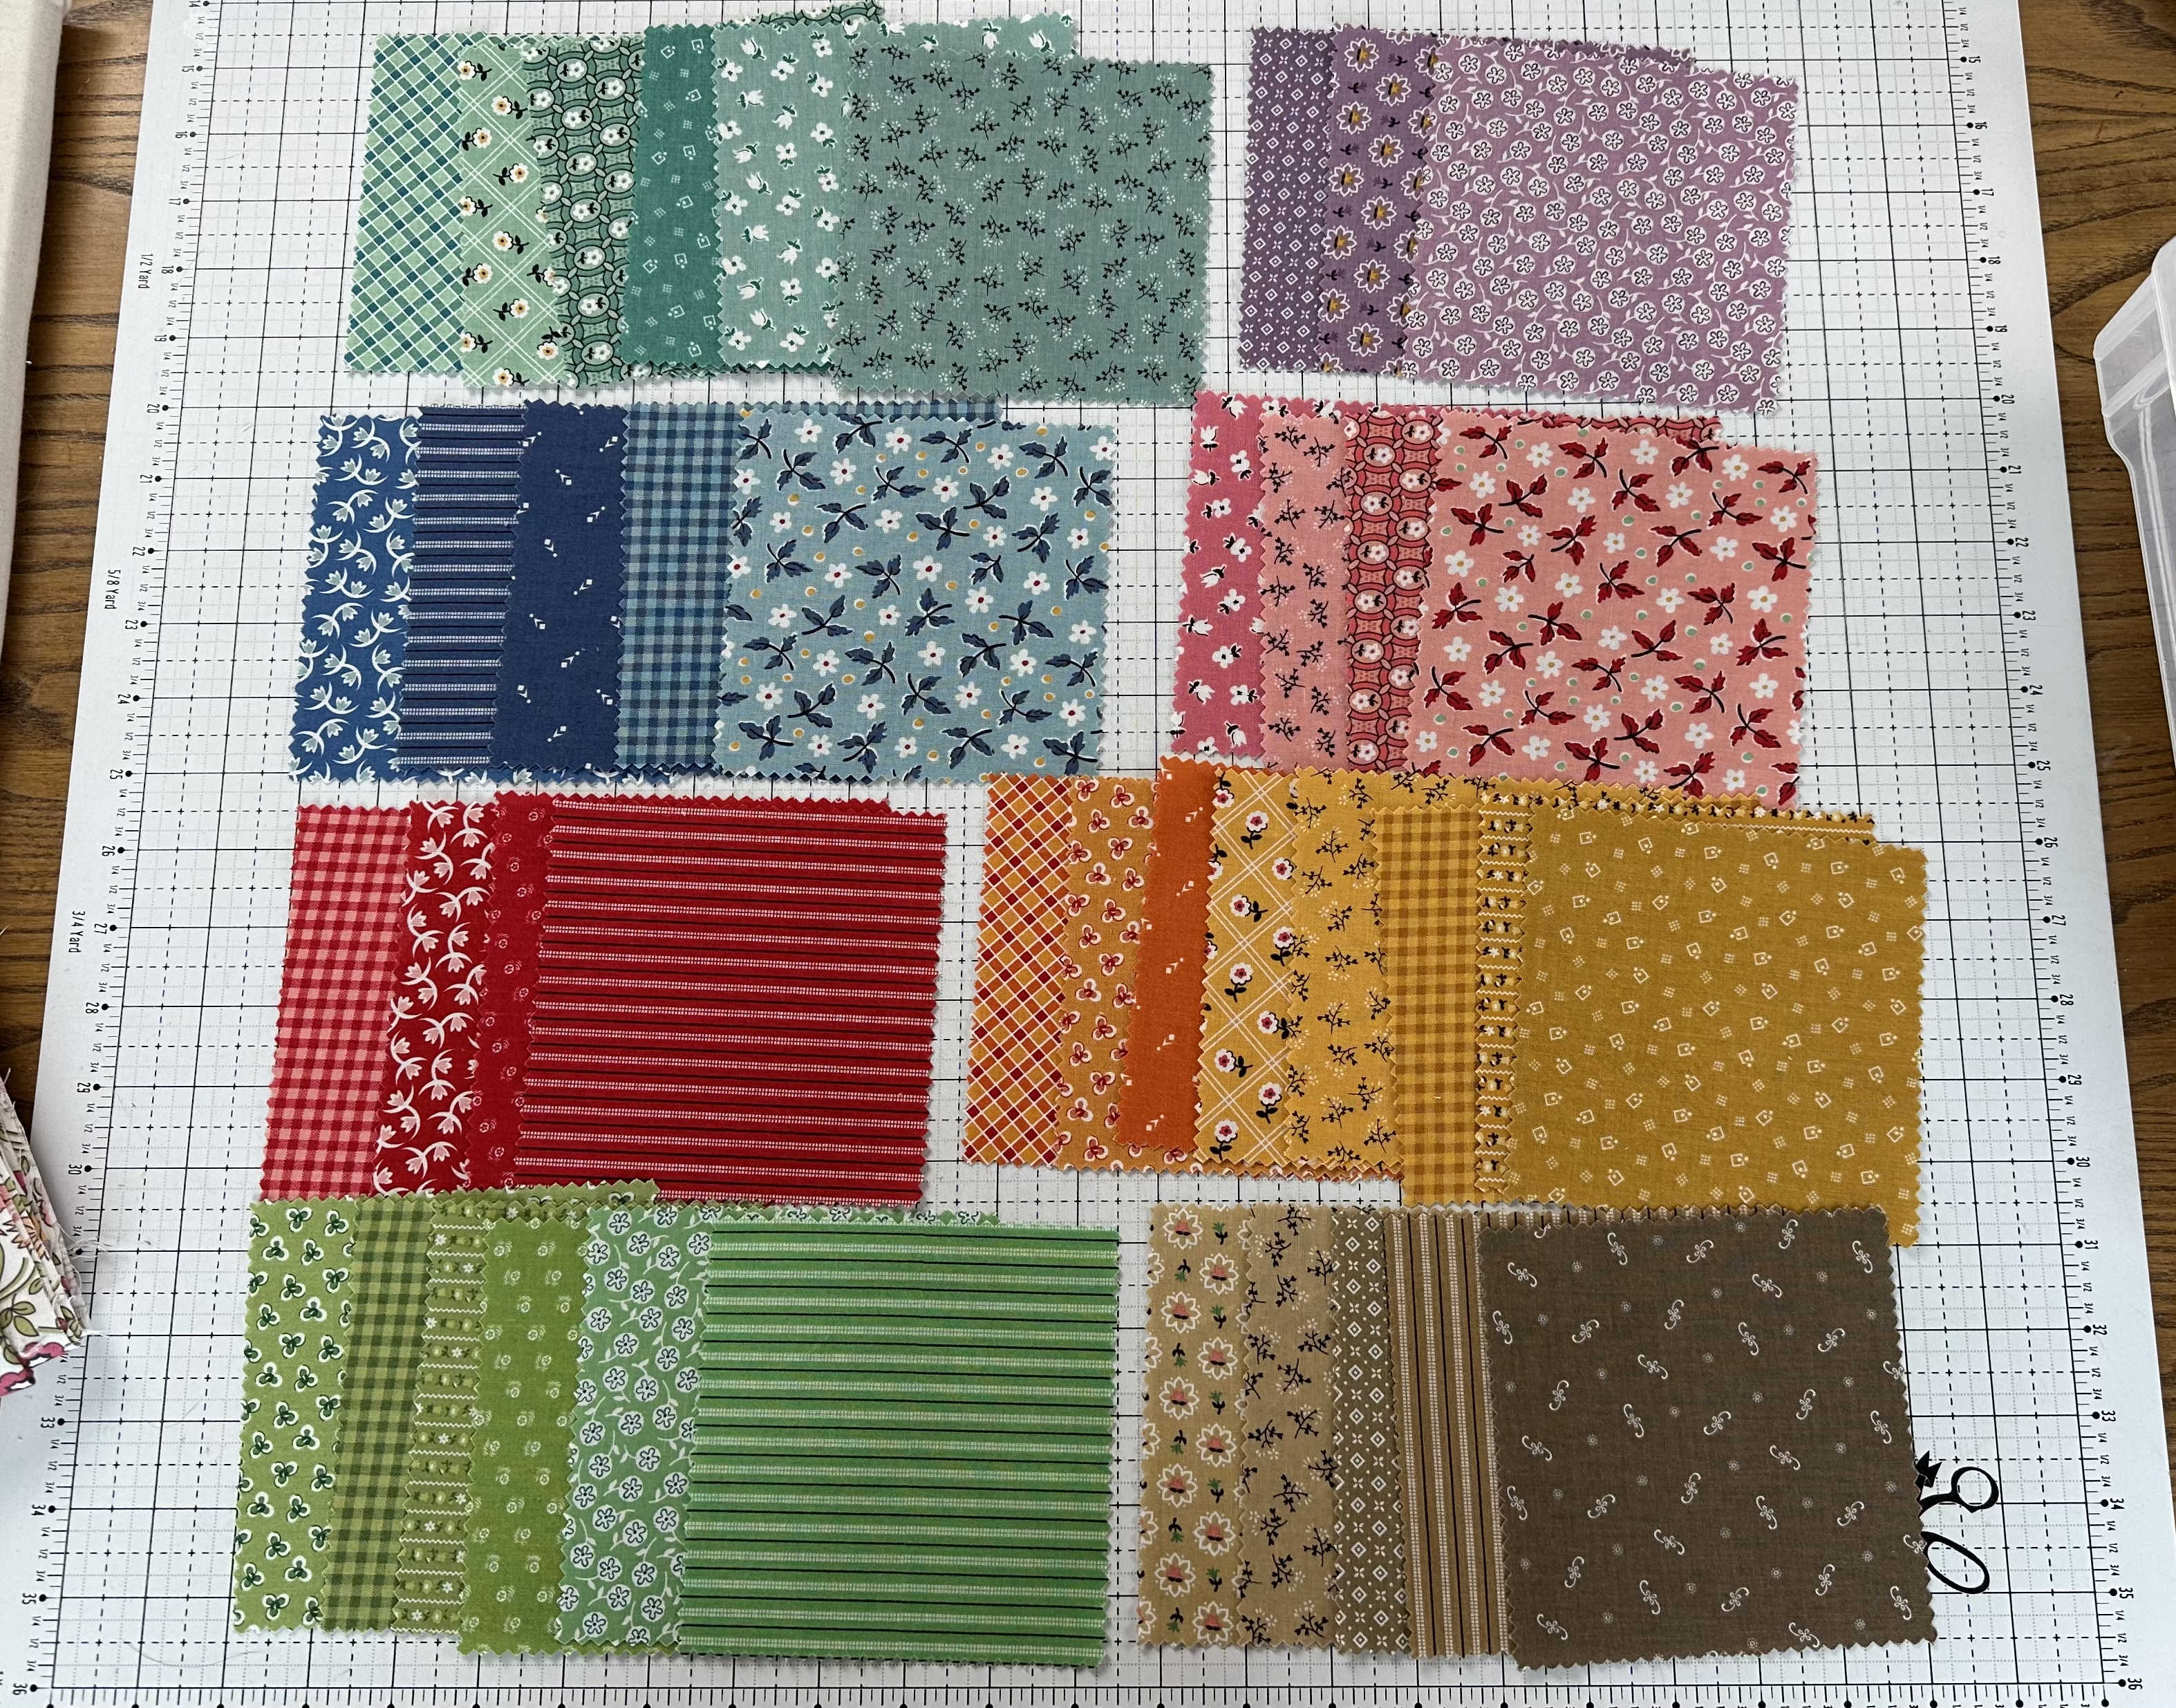 A selection of 5" squares for the Nona Quilt